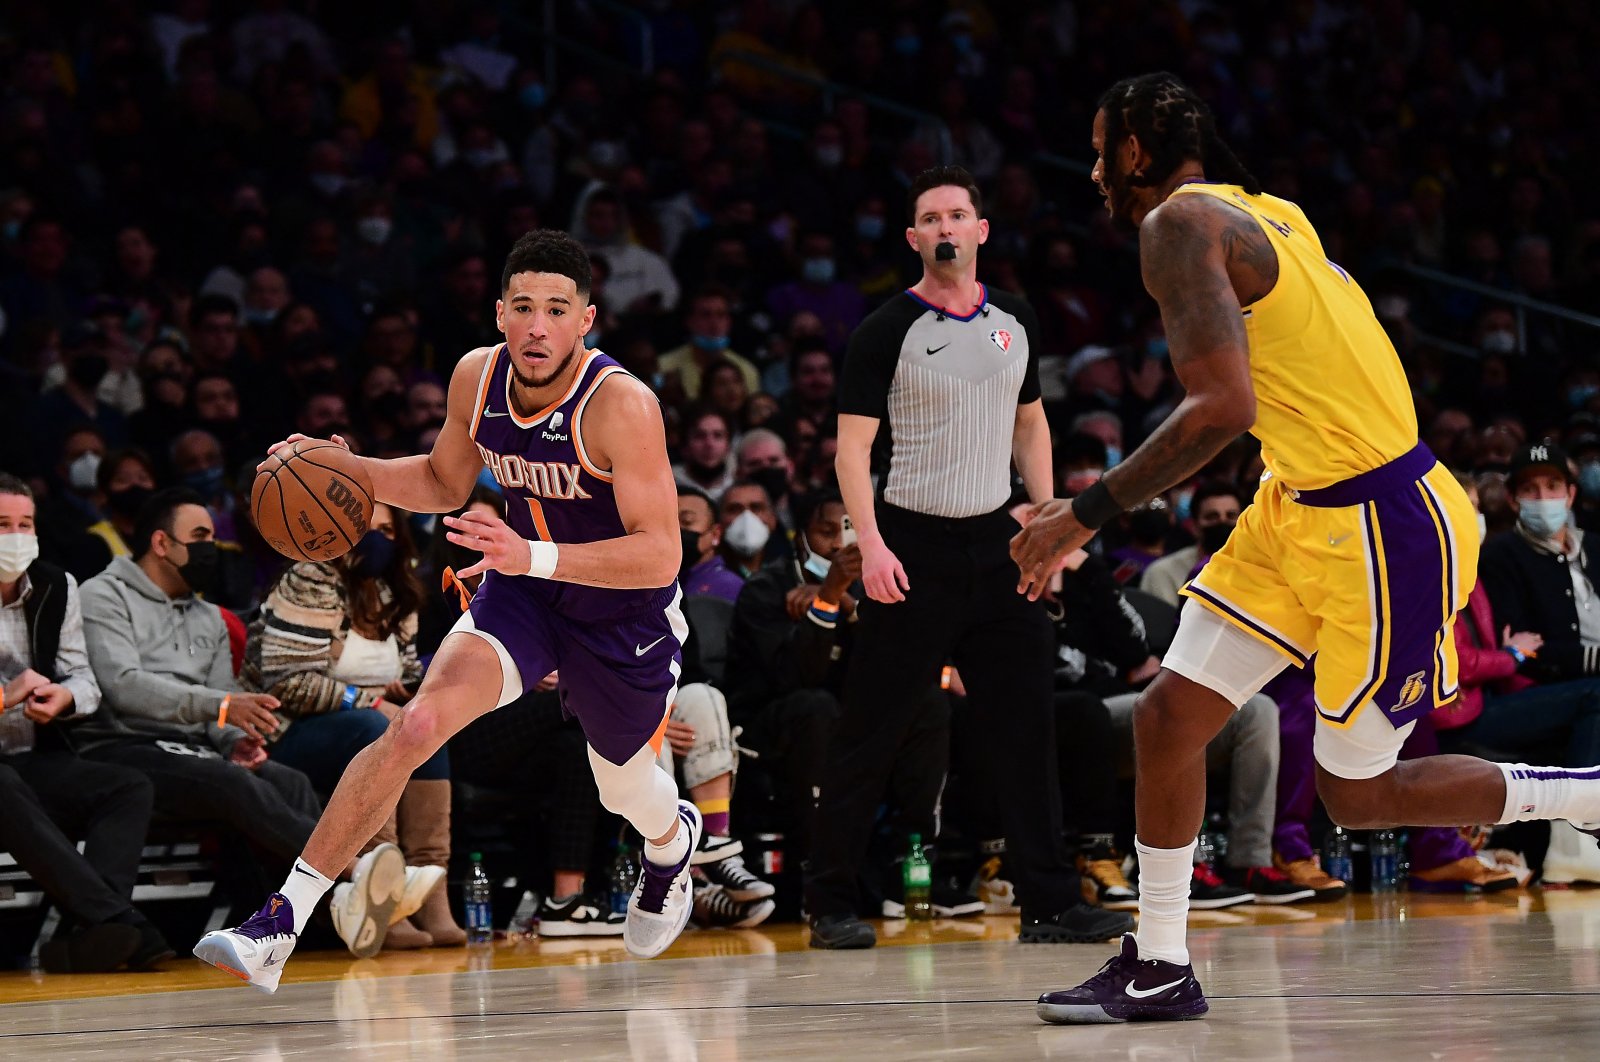 Phoenix Suns guard Devin Booker (L) goes past Los Angeles Lakers forward Trevor Ariza (R) during an NBA game at Staples Center, Los Angeles, California, U.S., Dec. 21, 2021. (Reuters Photo)